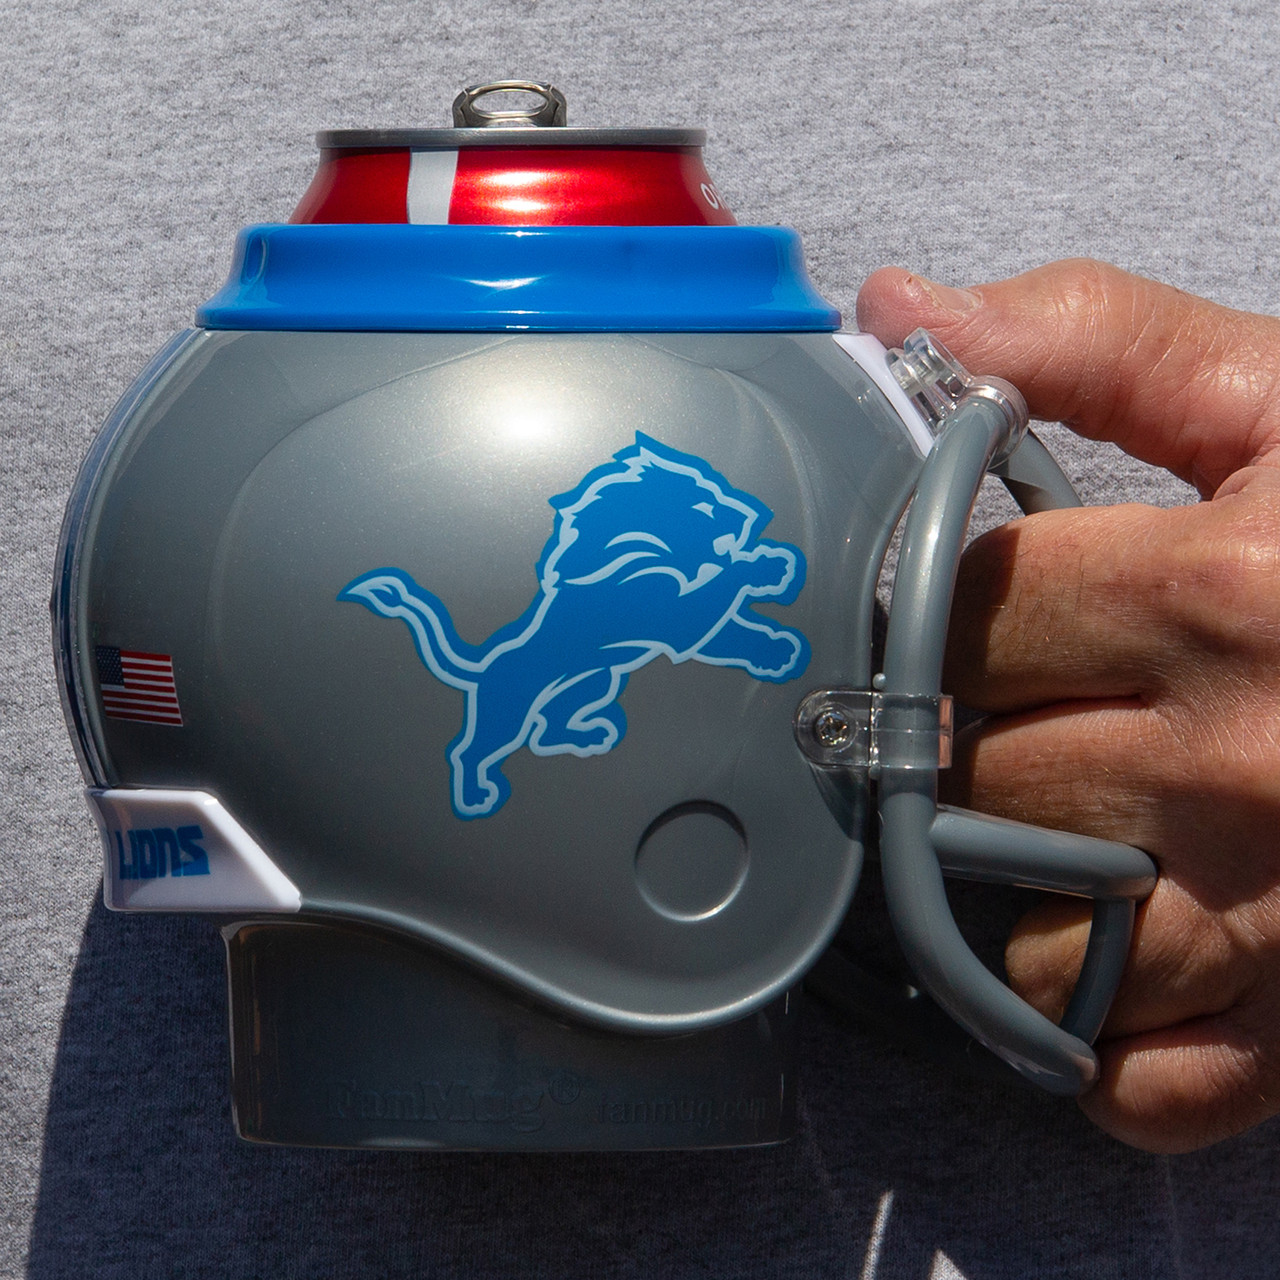 The Official FanMug of the NFL Detroit Lions